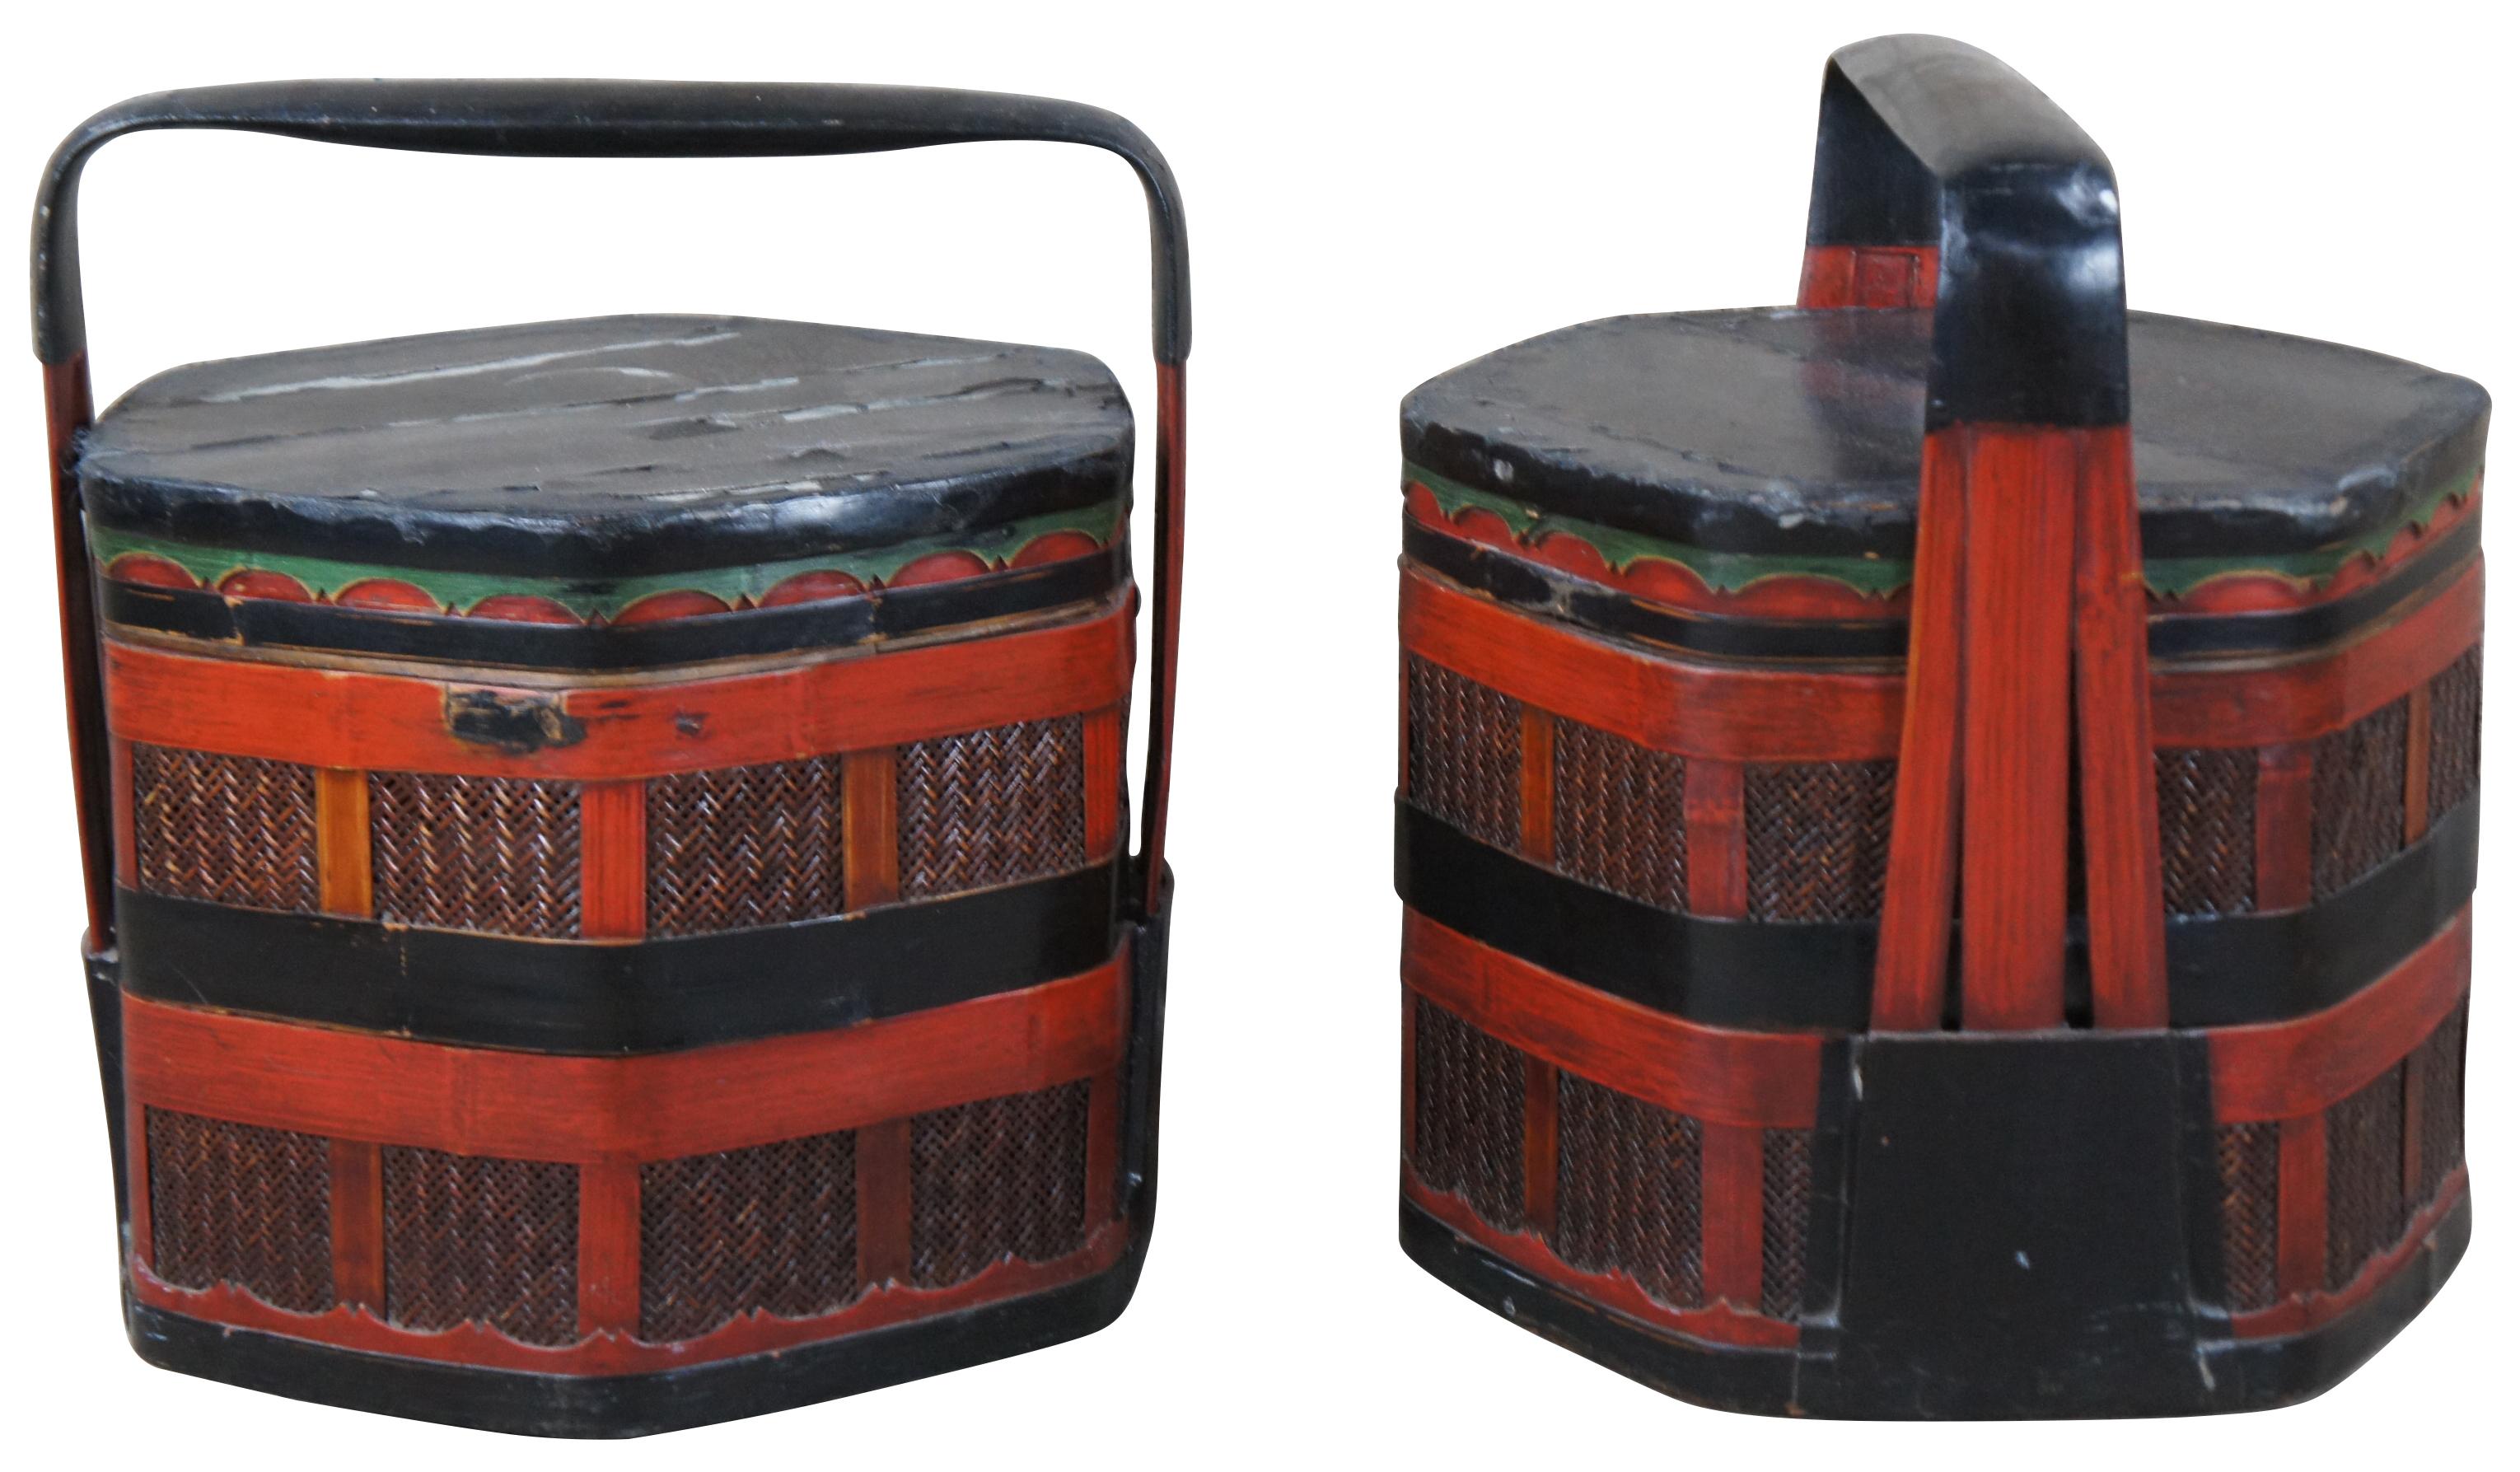 An impressive pair of antique Chinese two tiered hexagon shaped wedding basket or box. Made of lacquered bamboo and rattan. Hand painted in red and black with green accents. 

Written cursive script translates to poems about 